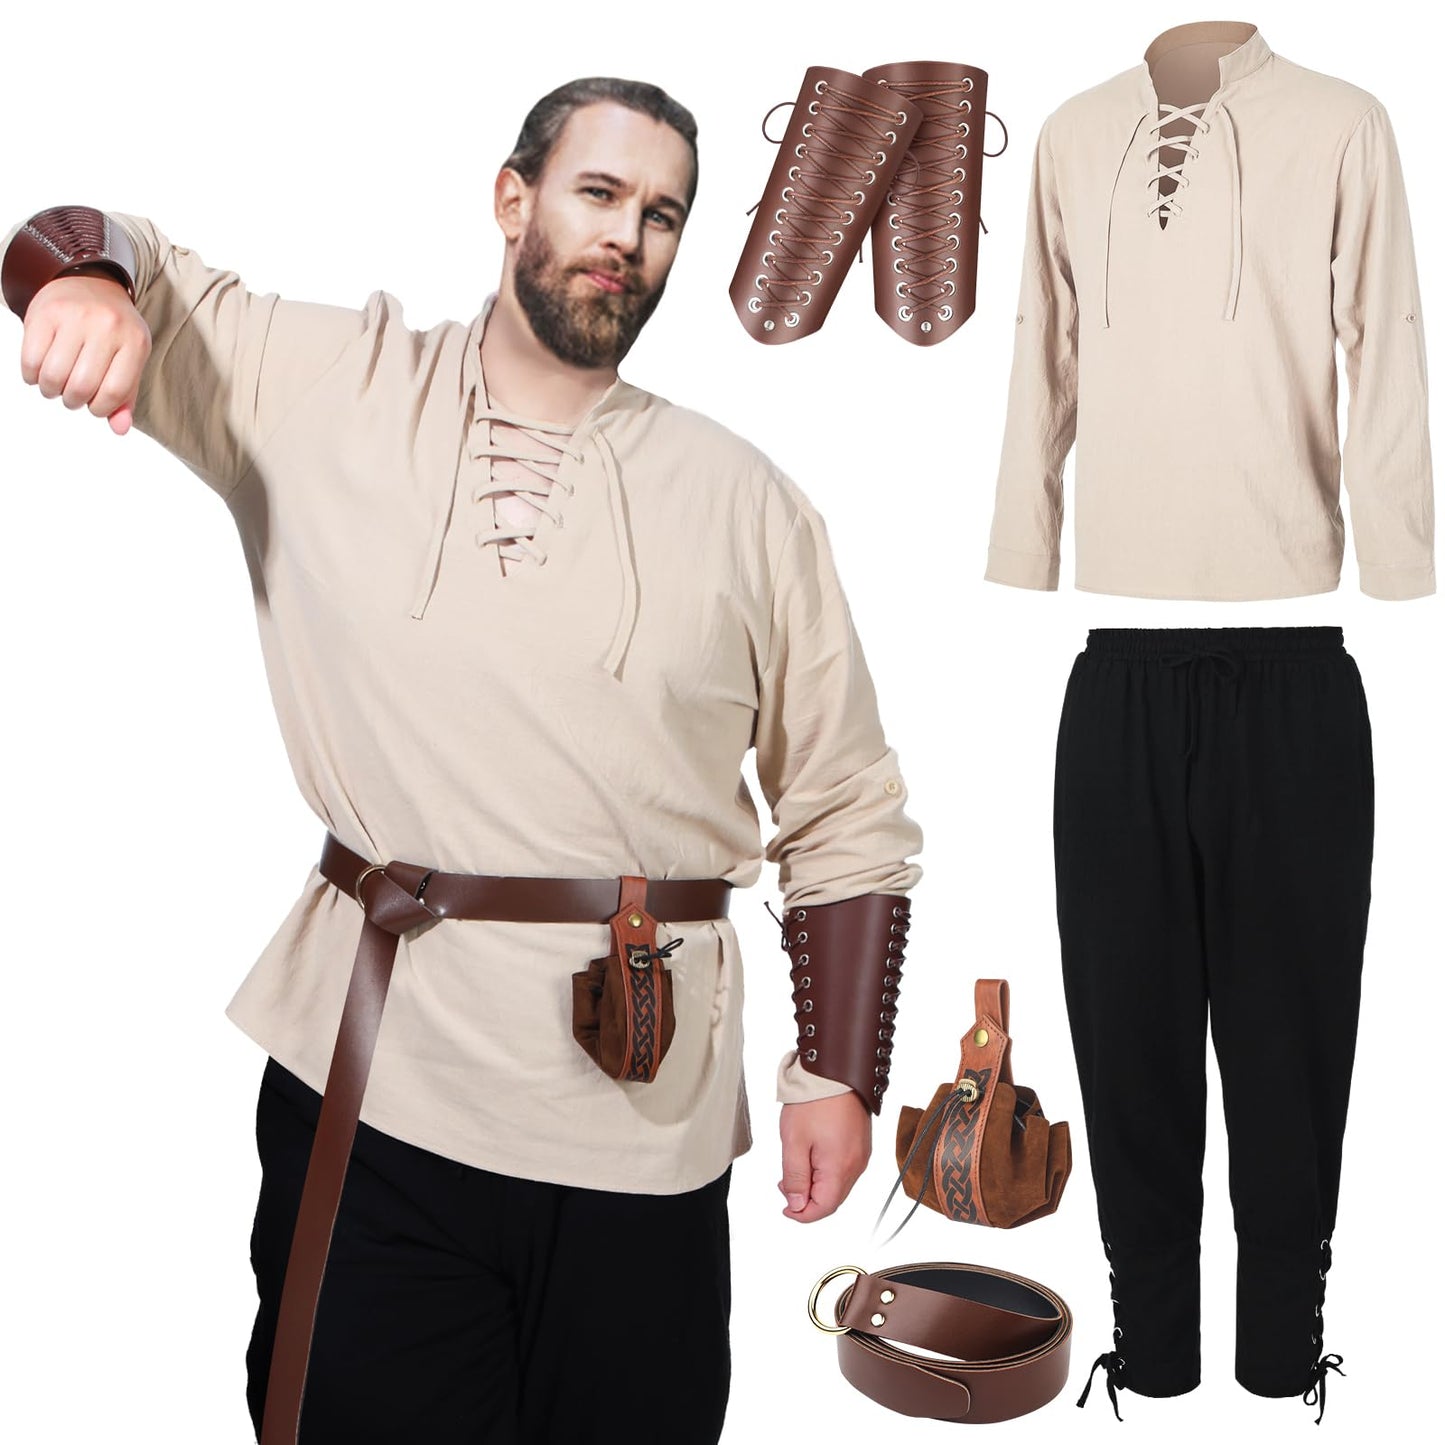 Jeyiour Men's Renaissance Costume Set Medieval Shirt Pirate Outfit Cosplay Viking Ankle Pants Belt Pouch Armband Beige, Black X-Large